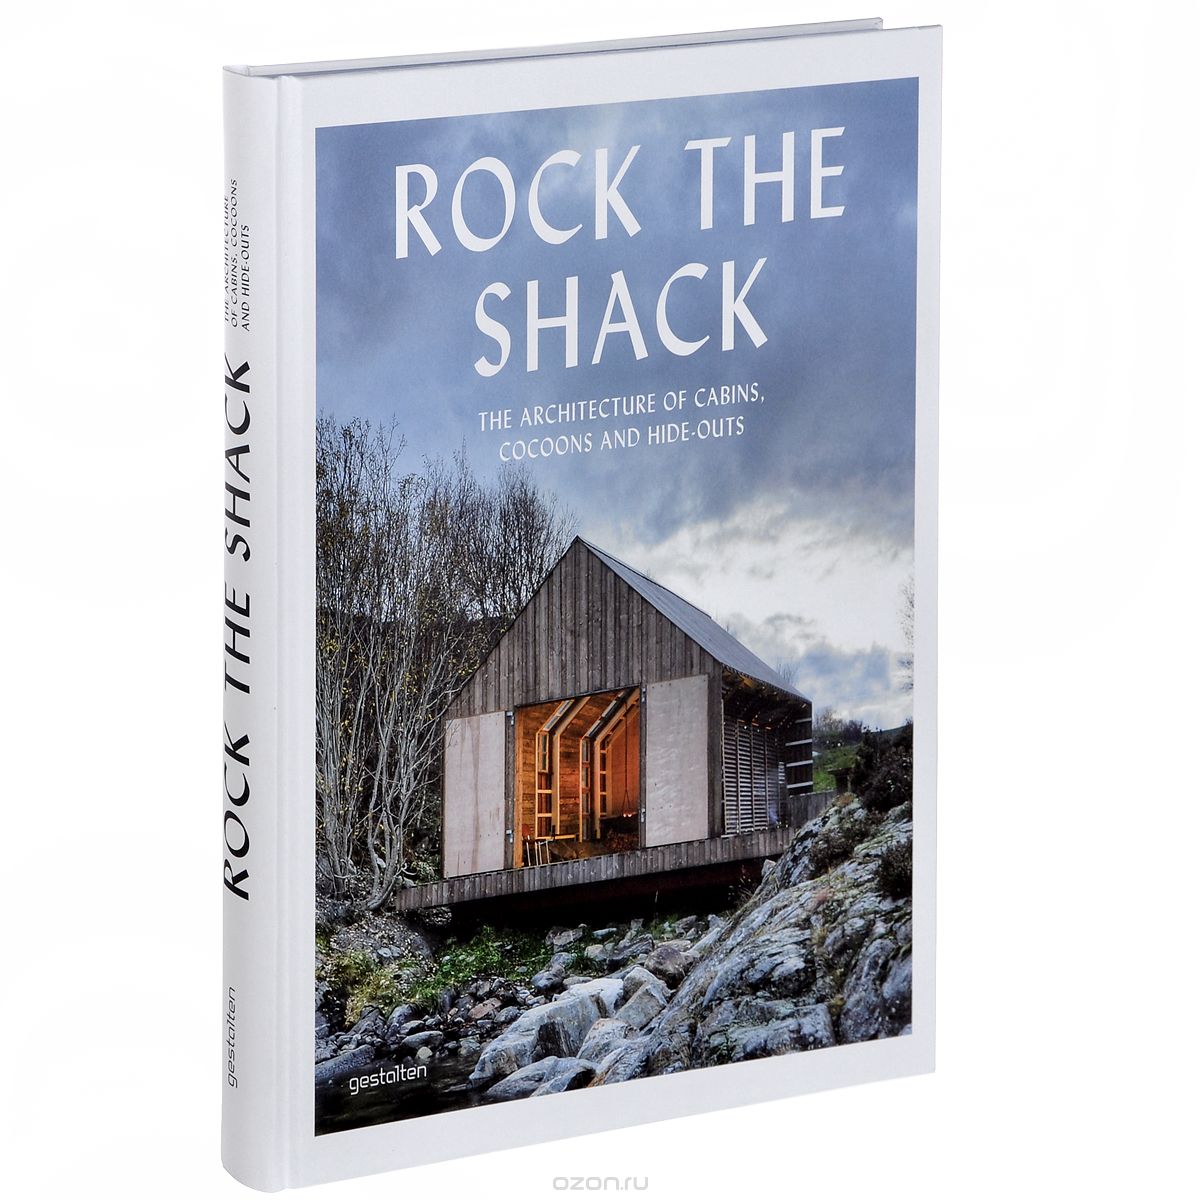 Скачать книгу "Rock the Shack: The Architecture of Cabins, Cocoons and Hide-Outs"